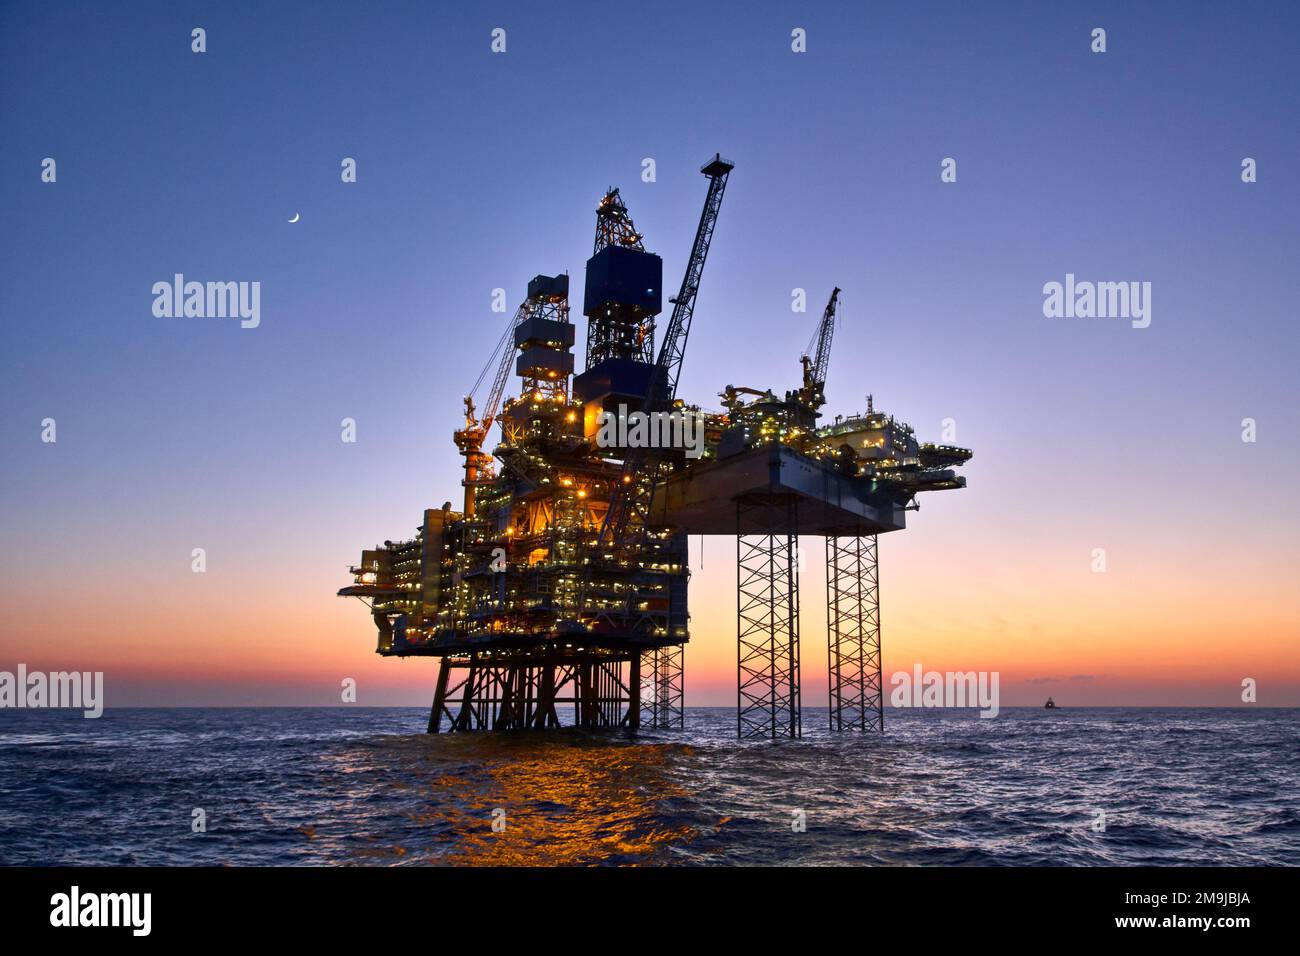 Offshore oil and gas platform in the sea at sunset.  Jack up rig crude oil production in ocean. Stock Photo